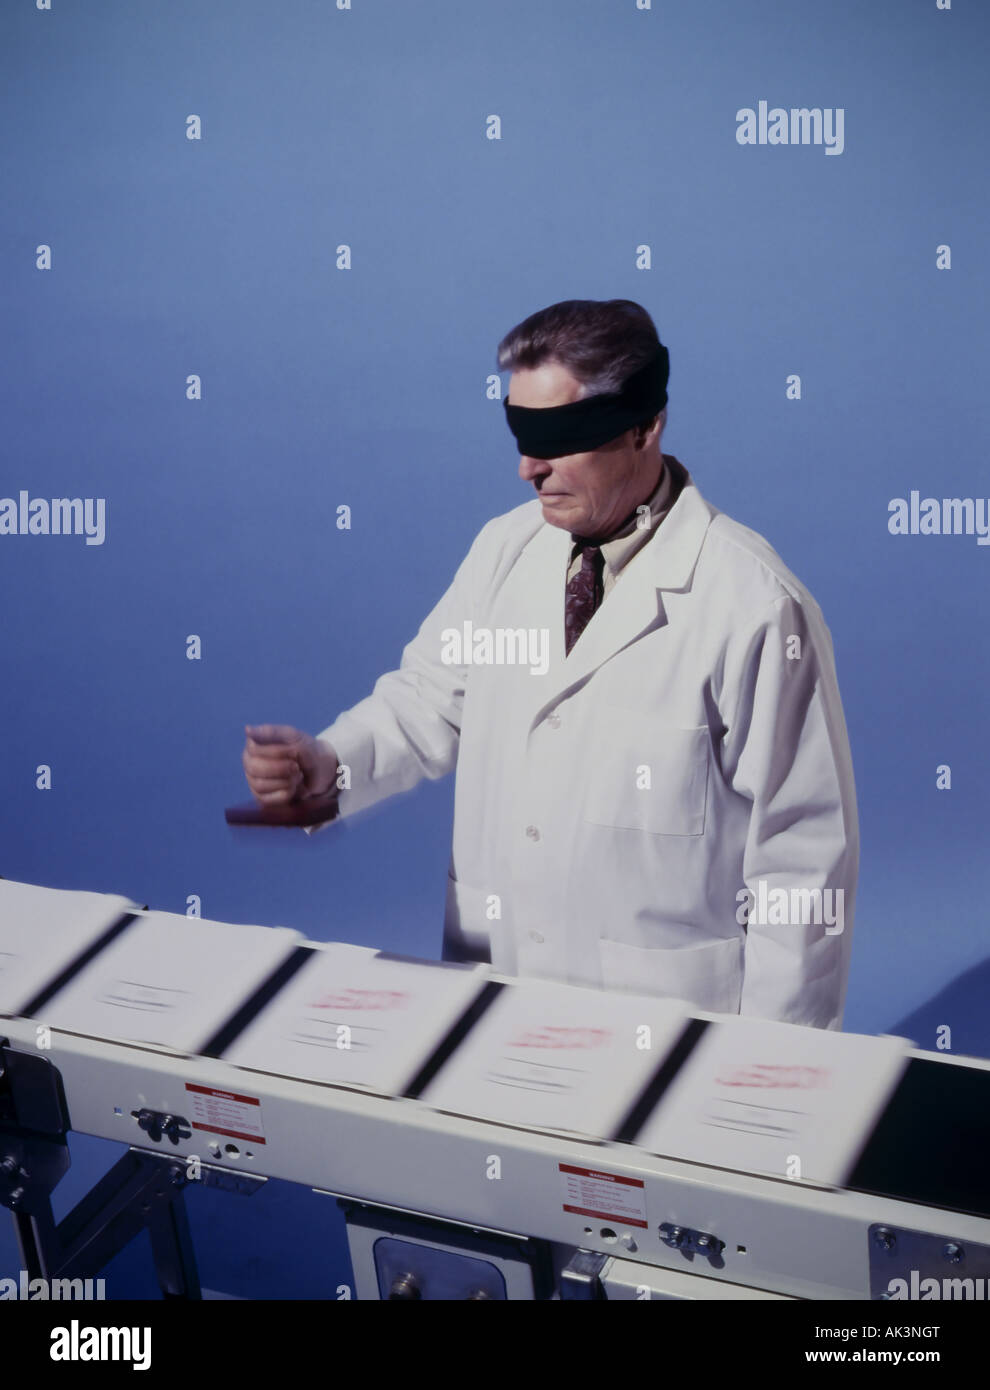 blind folded Doctor stamping forms on a conveyor belt Stock Photo